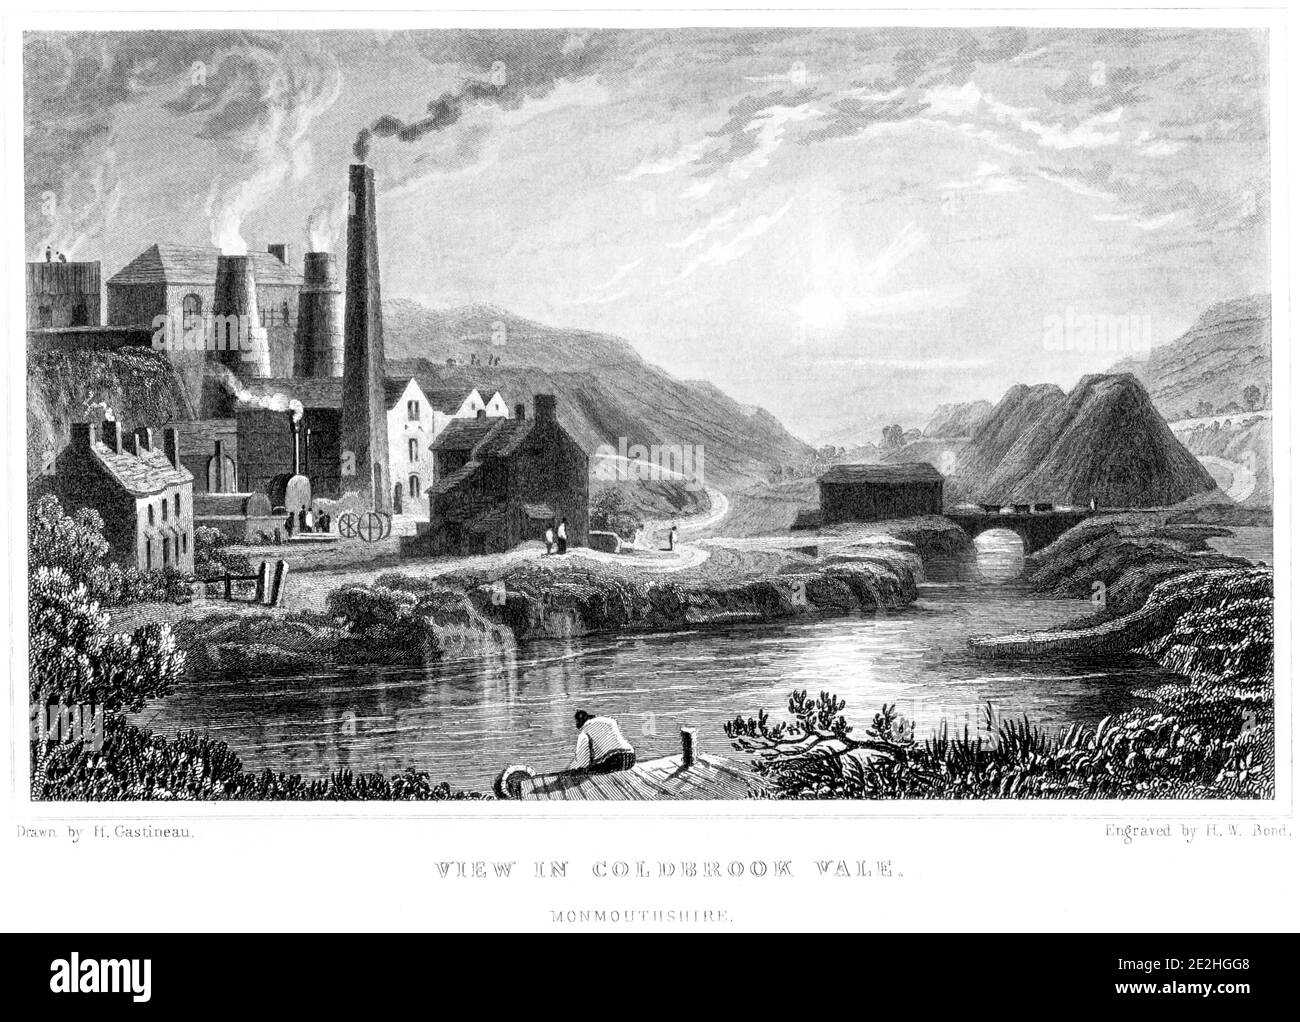 An engraving of a View in Coldbrook Vale, Monmouthshire scanned at high resolution from a book published in 1854. Believed copyright  free. Stock Photo